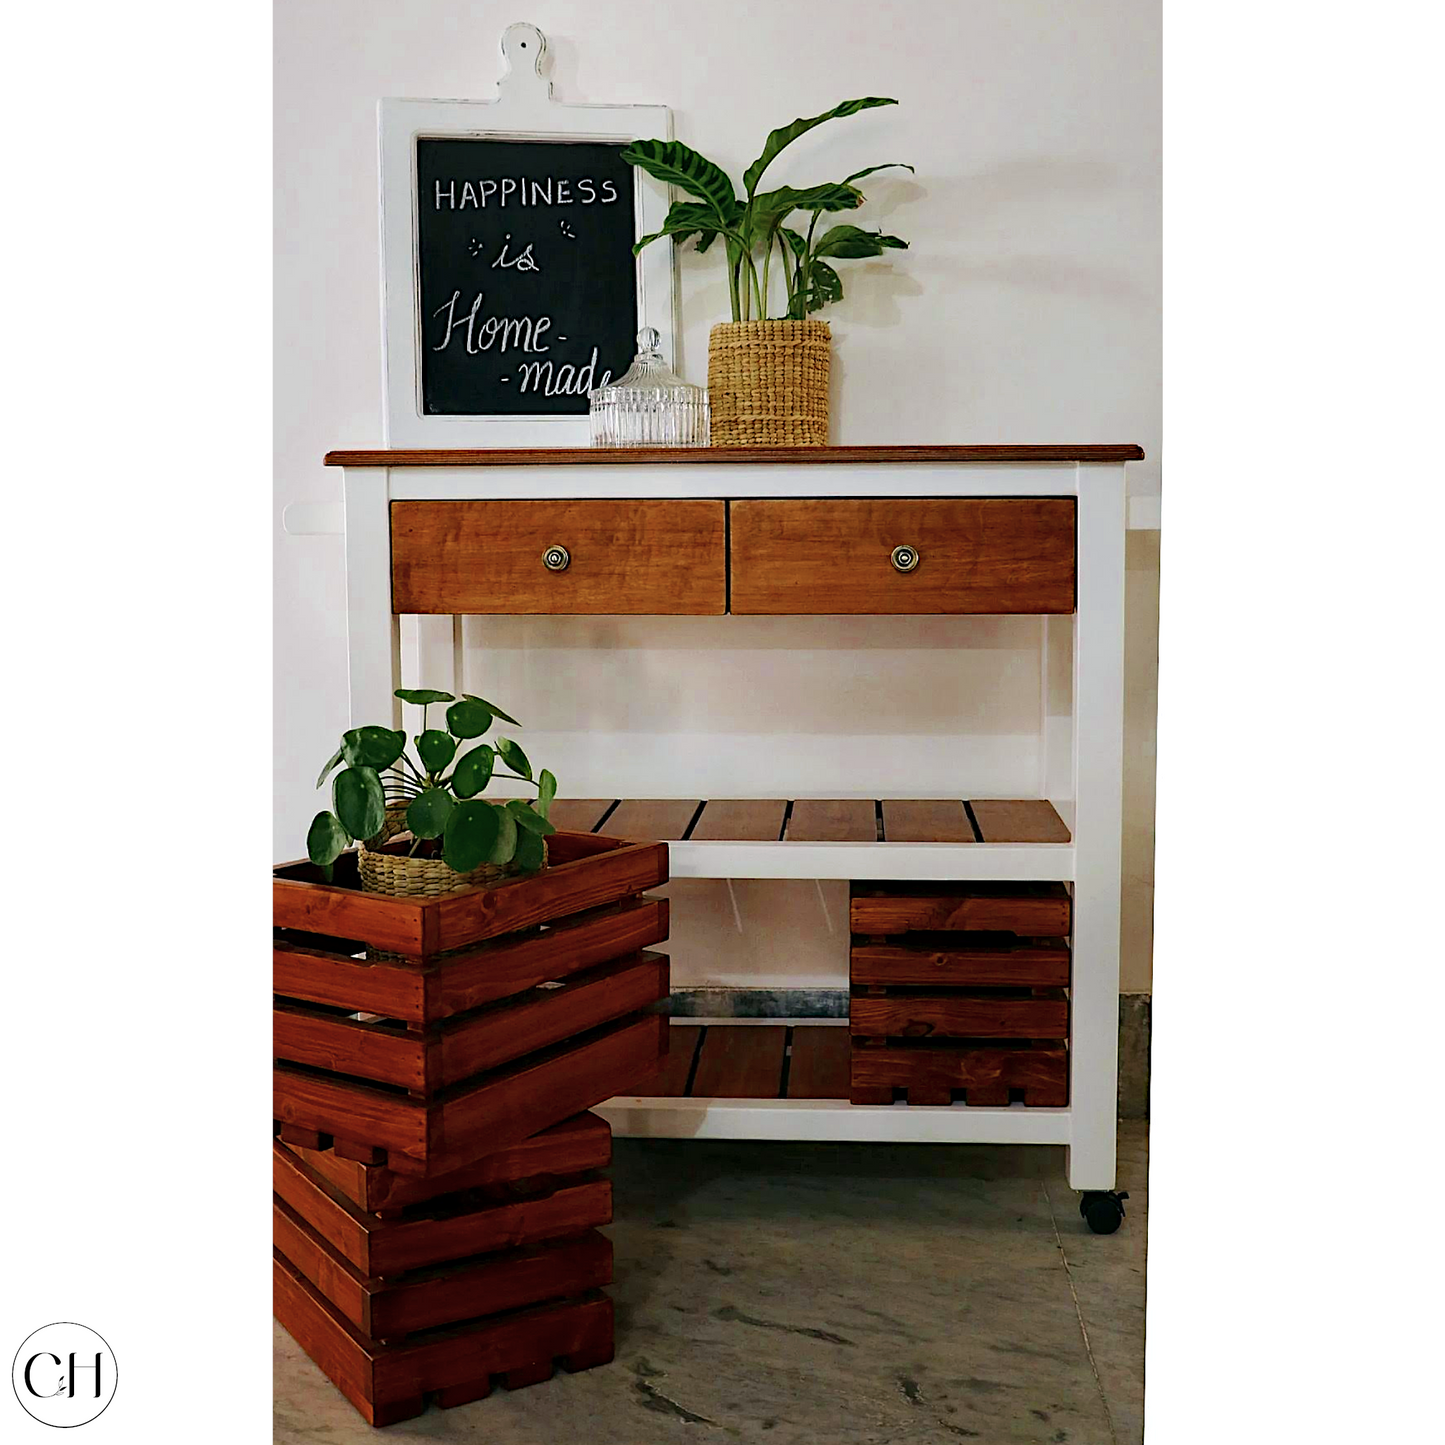 CustHum Belfast - Wooden kitchen island trolley, showing 2 crates stacked outside on the left and 1 crate on the bottom shelf, plant and decoratives on top